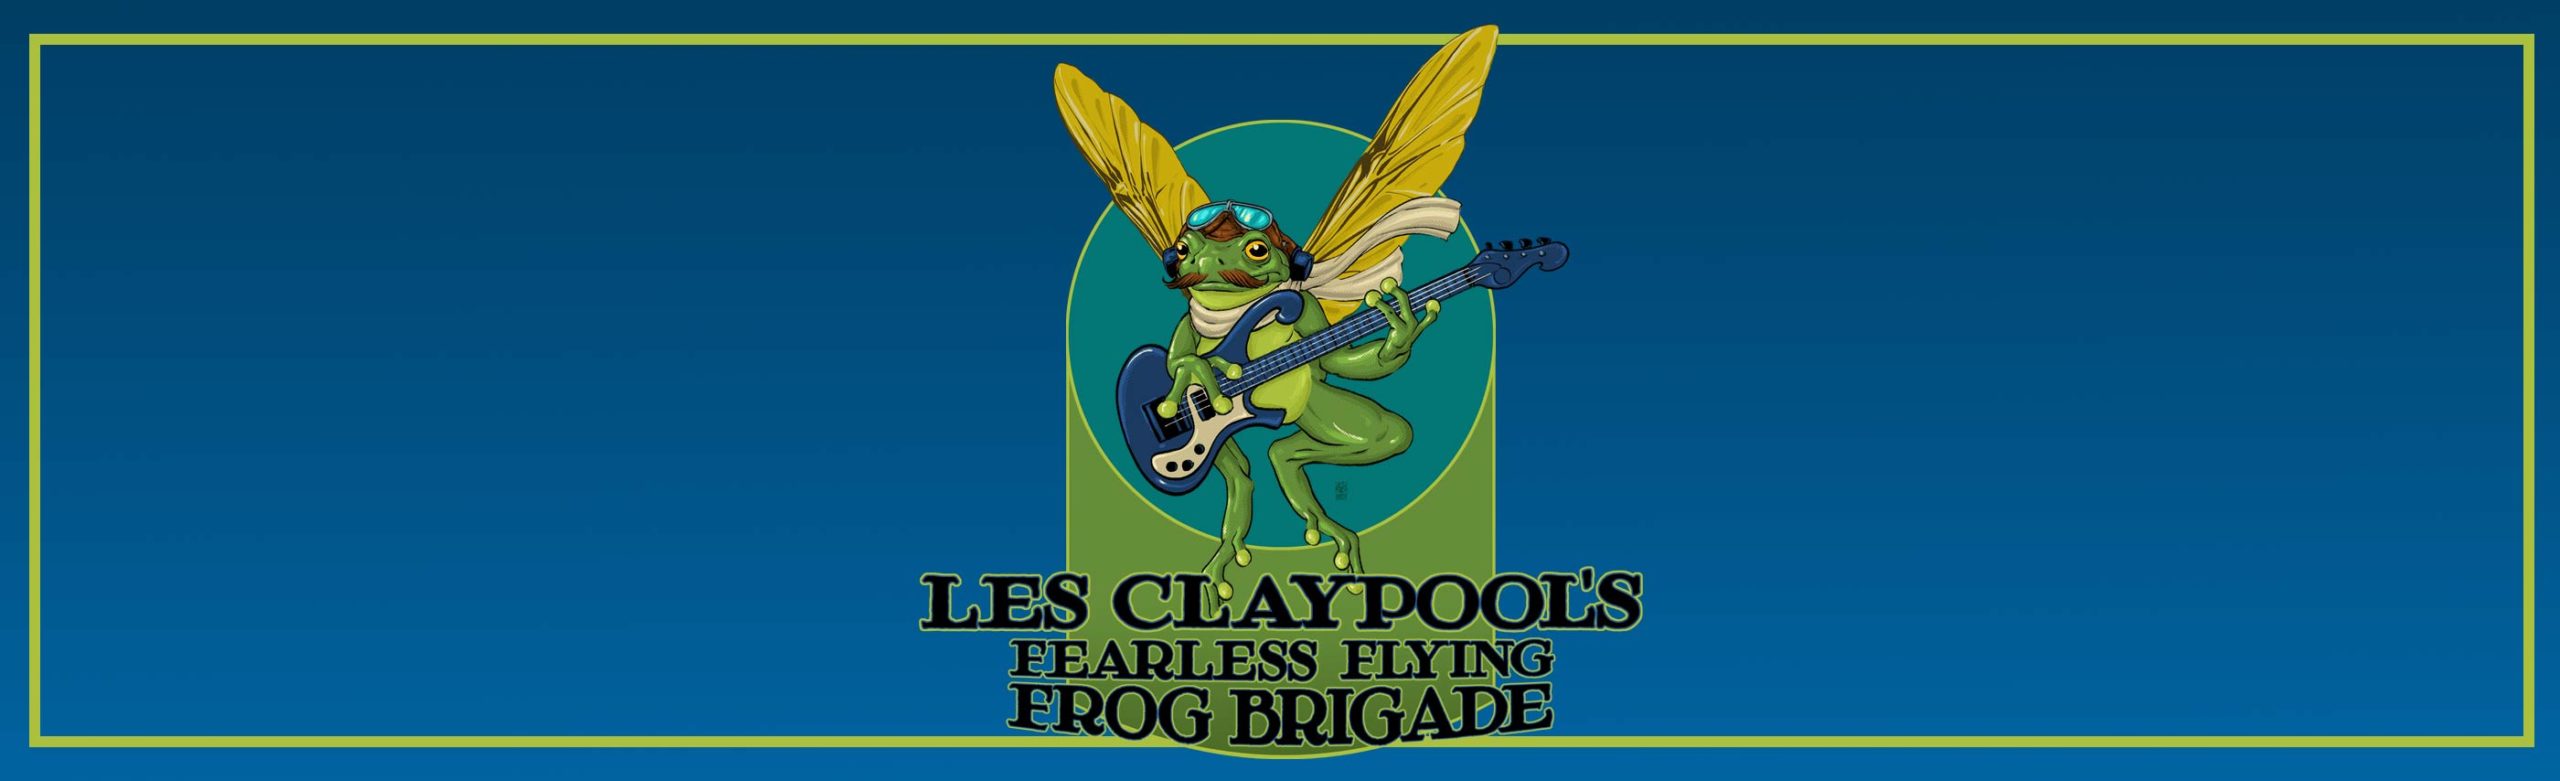 Les Claypool’s Fearless Flying Frog Brigade Confirms Concert at KettleHouse Amphitheater Image